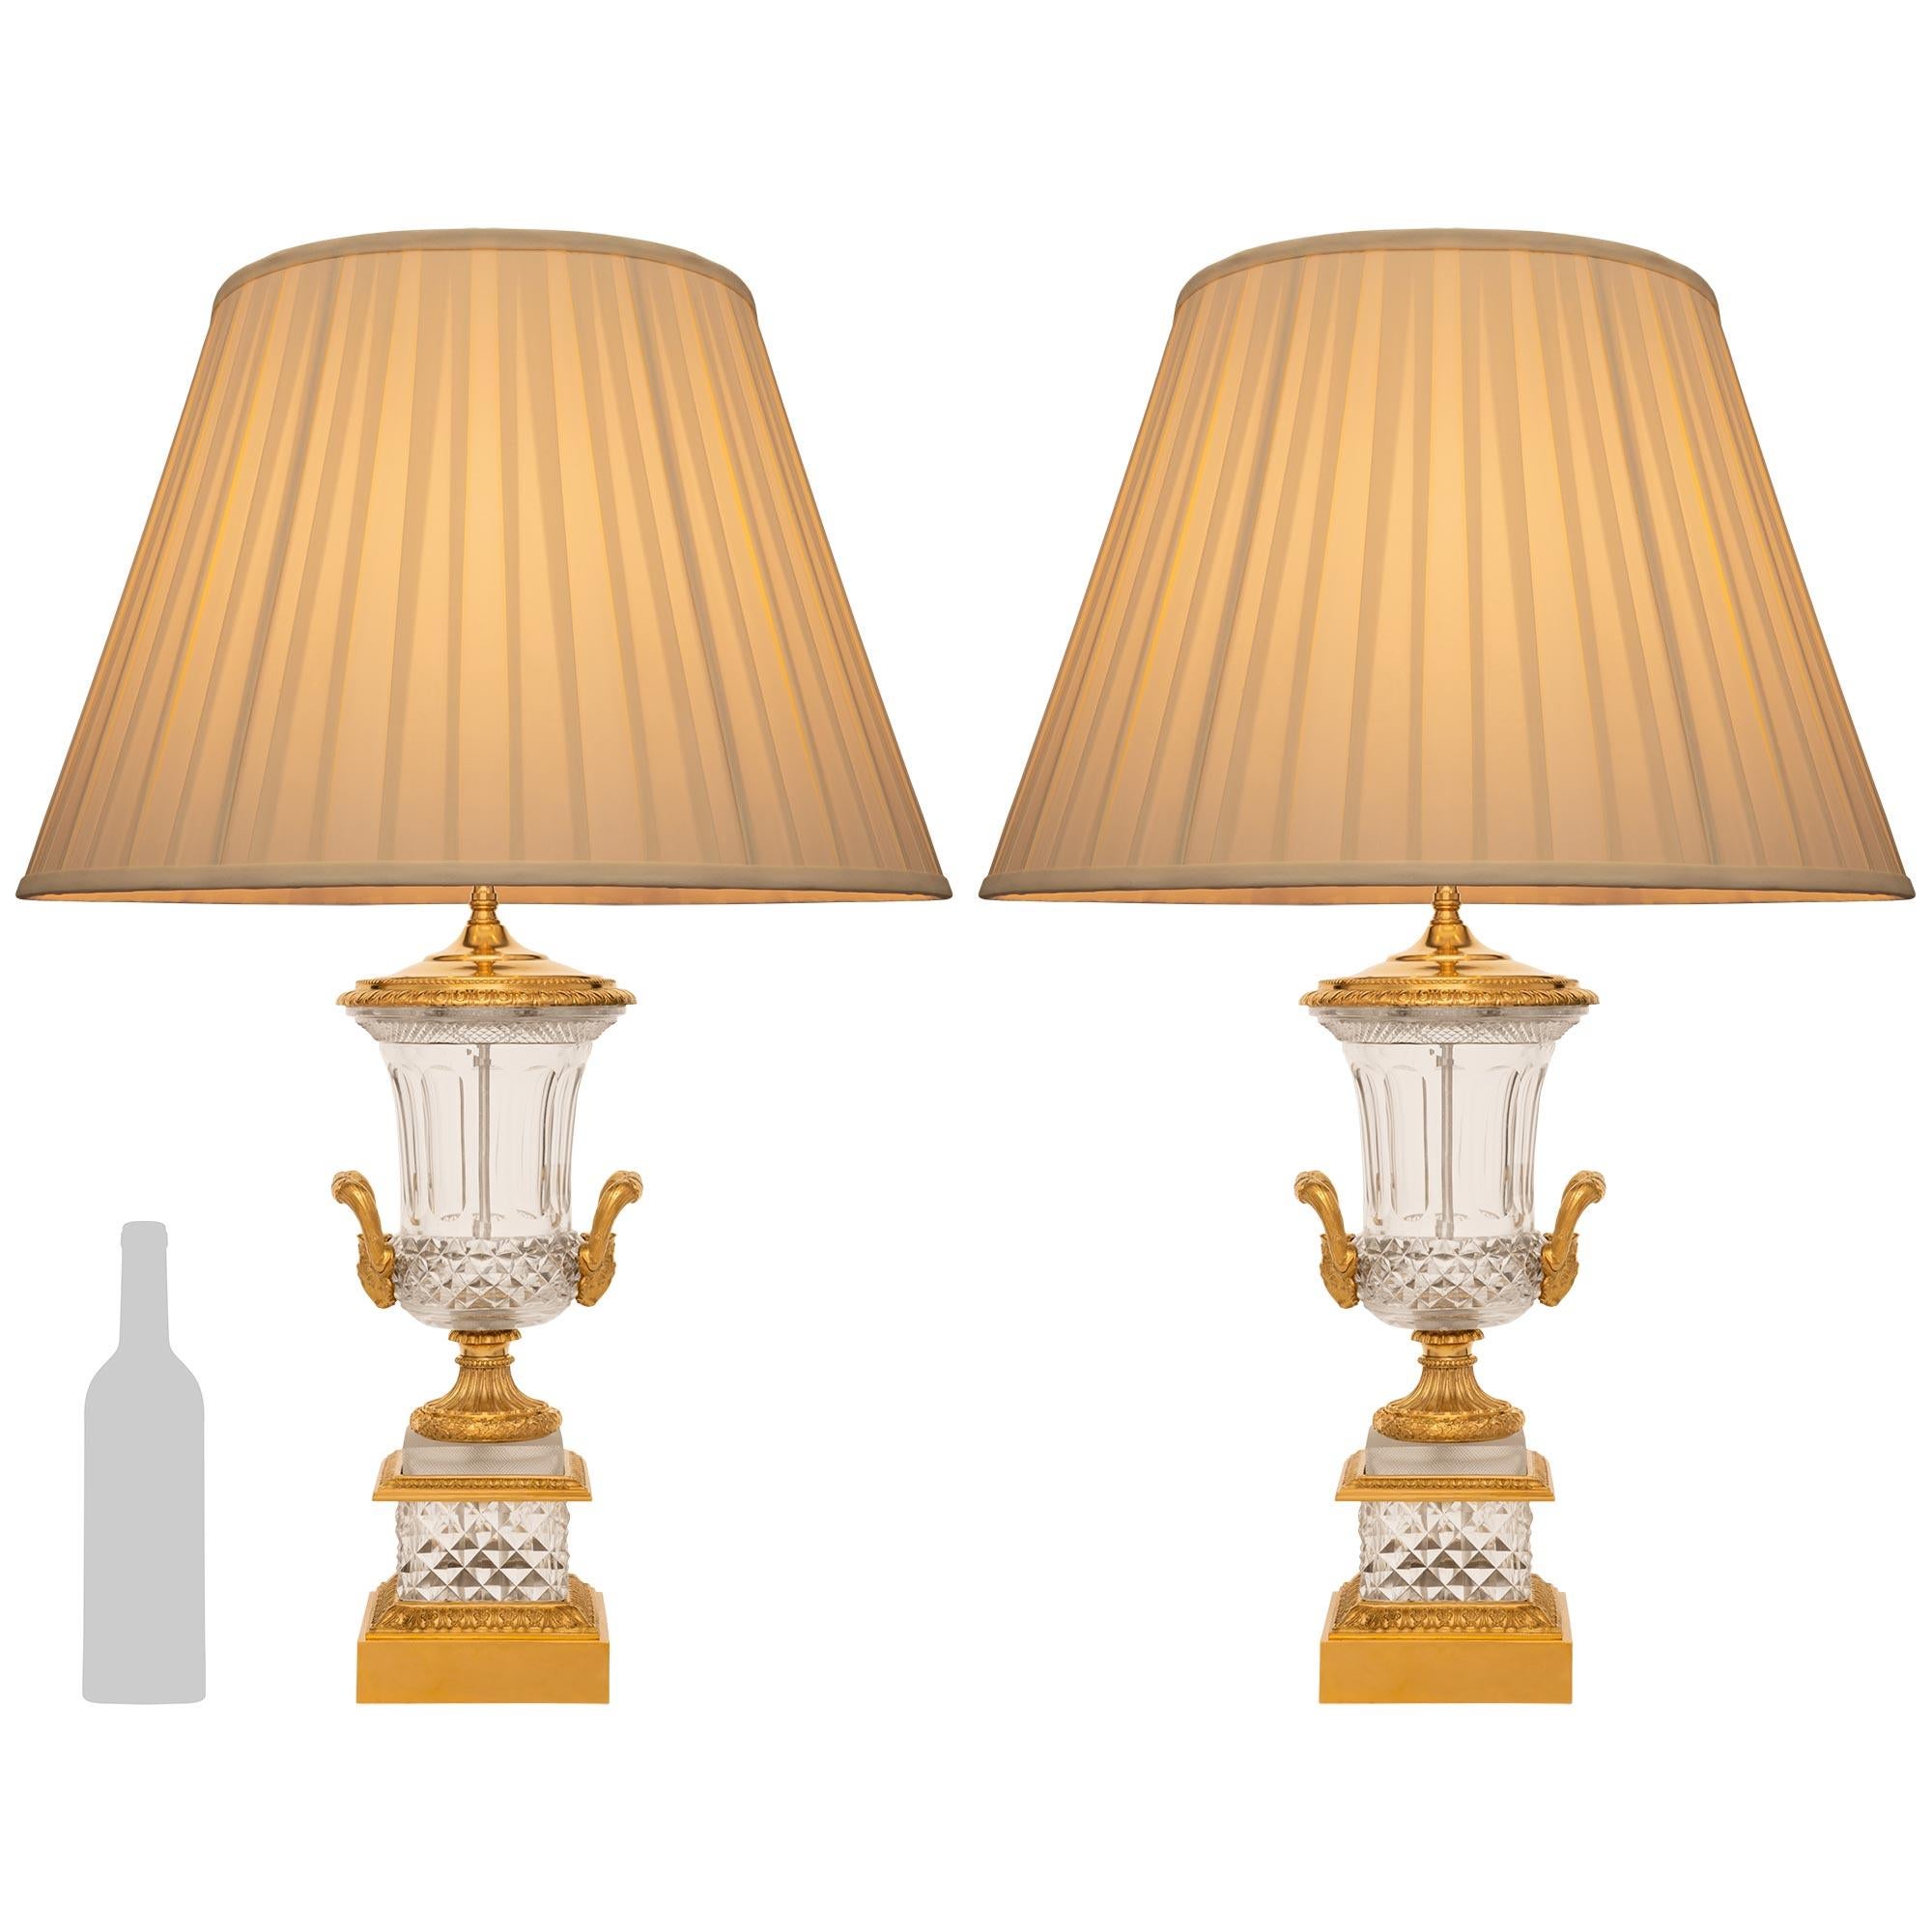 A high quality and most elegant pair of French 19th century Louis XVI st. Baccarat Crystal and Ormolu lamps. Each lamp is raised on a square Ormolu plinth displaying a Coeur-de-Rai band below a lattice cut Crystal pedestal. An elegant central Ormolu